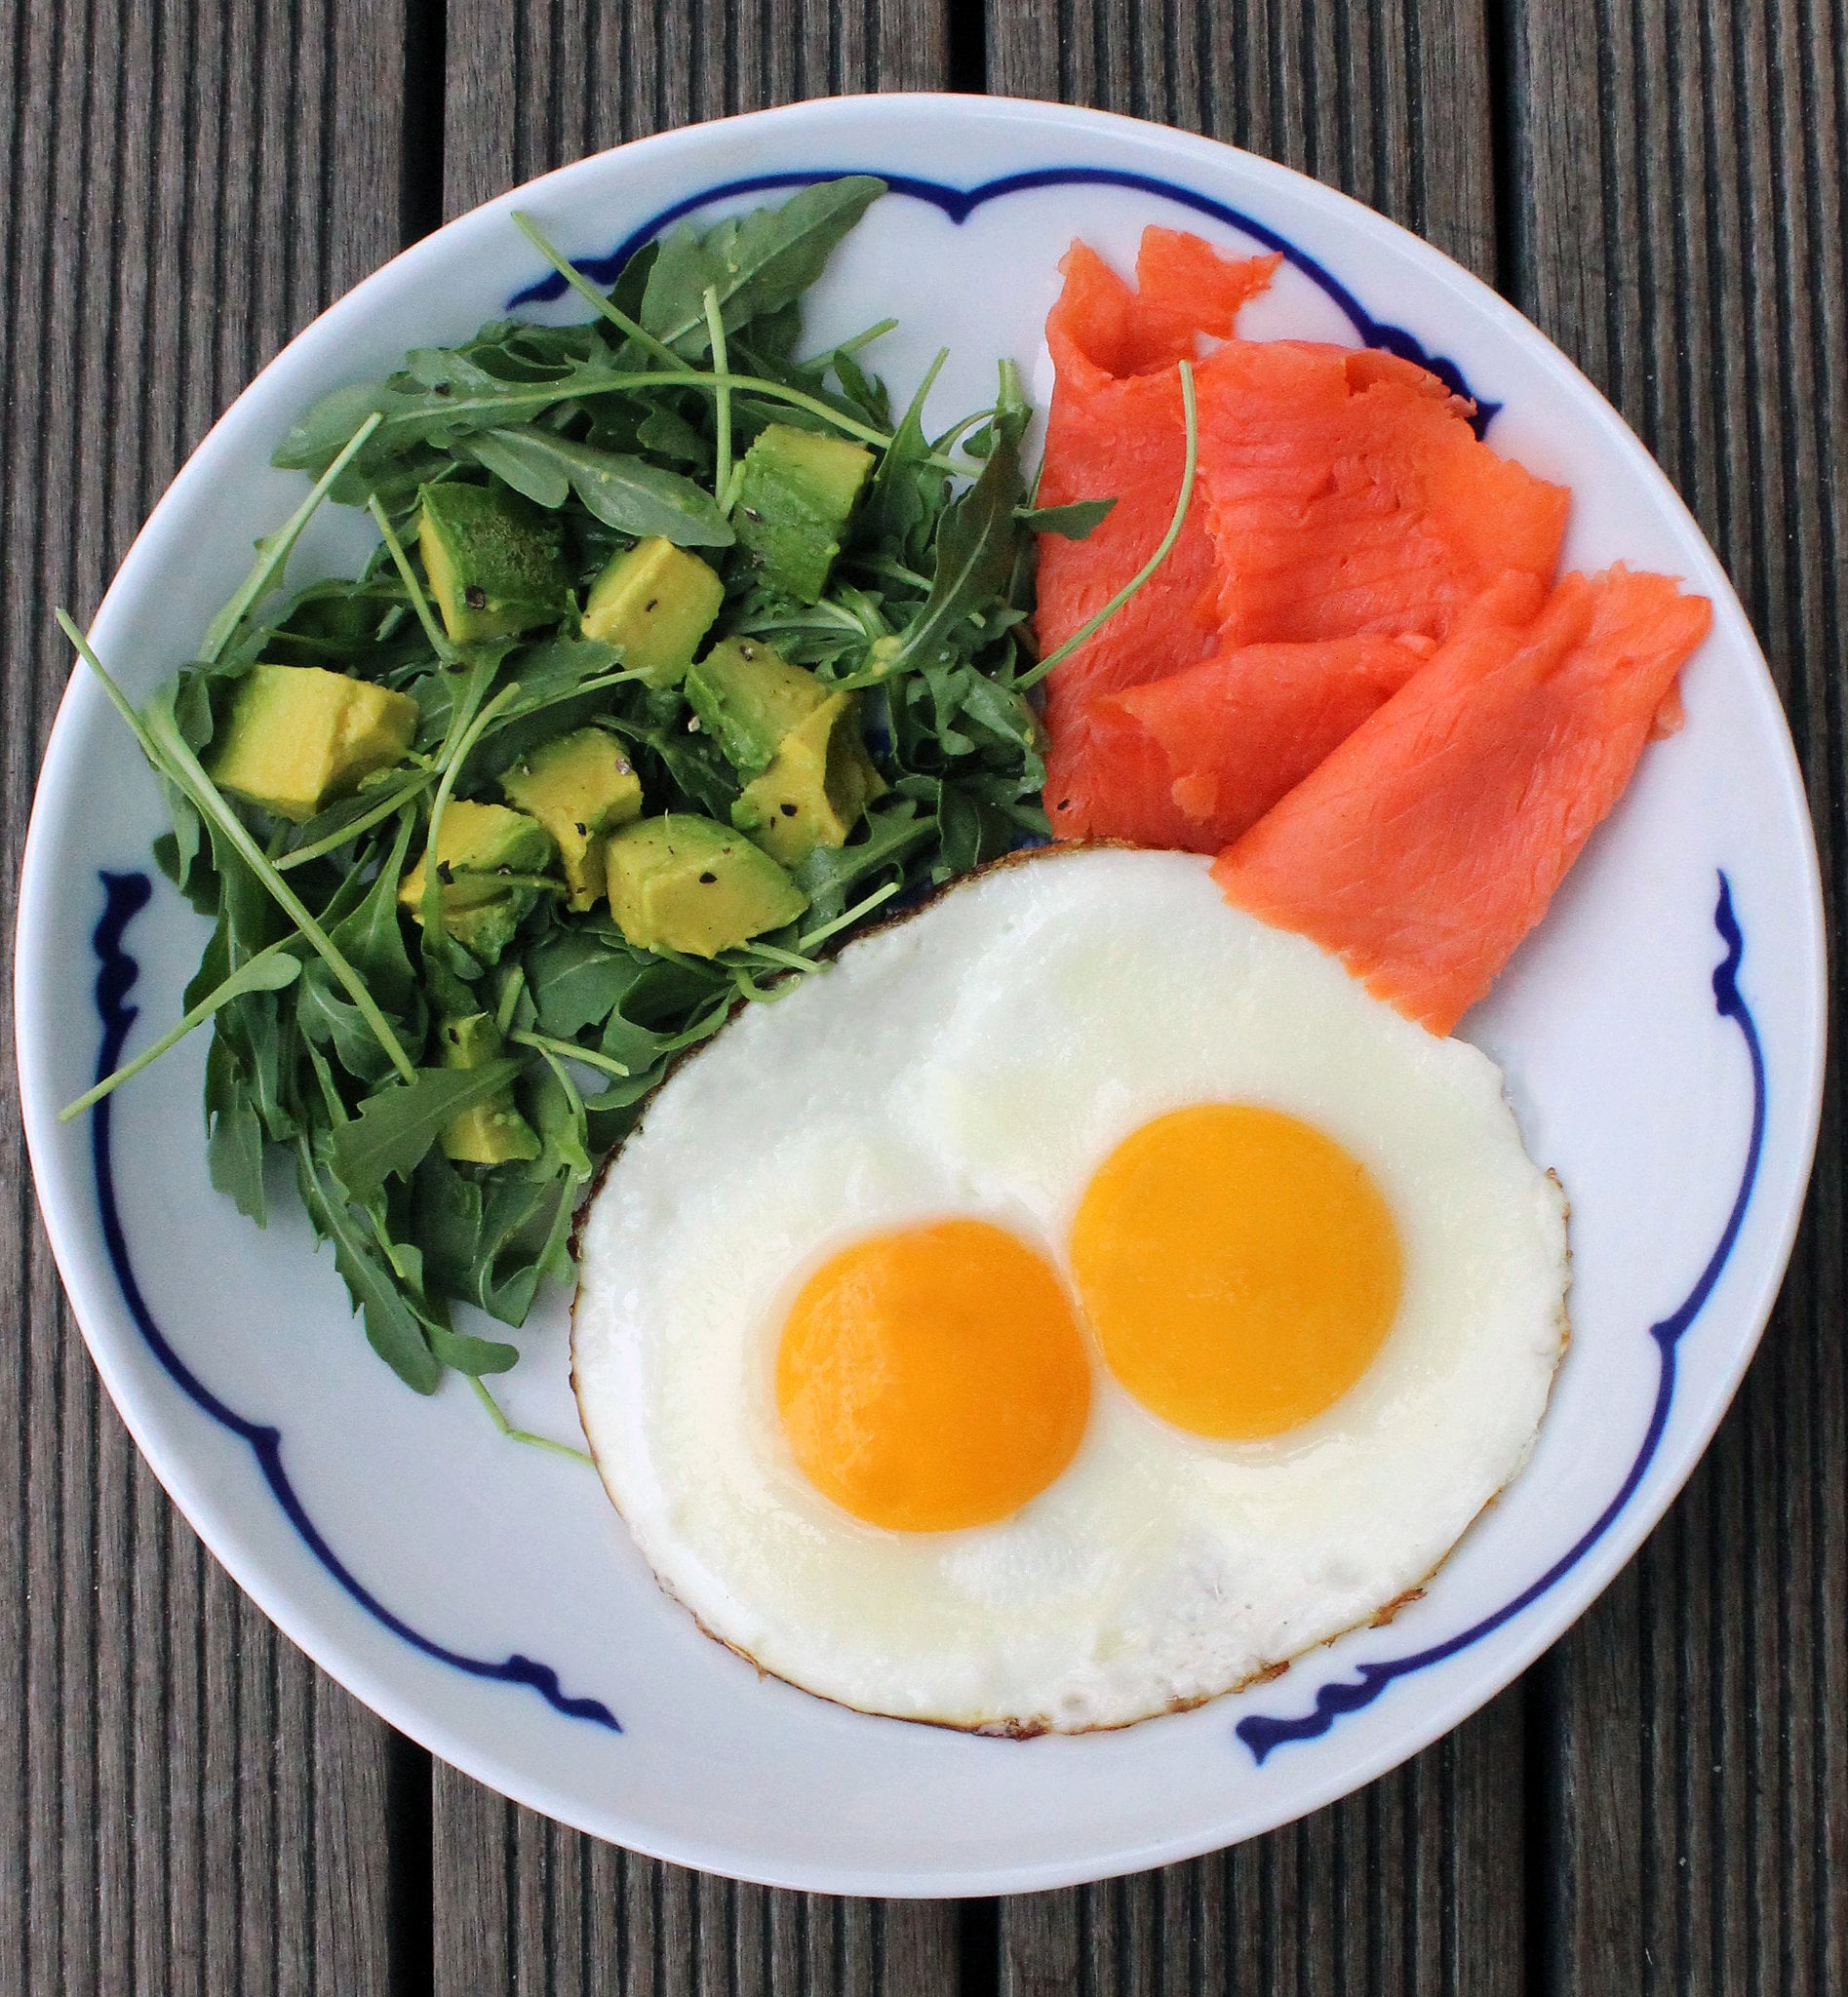 5 Best Egg Recipes to Shrink Belly Fat, Says Dietitian — Eat This Not That